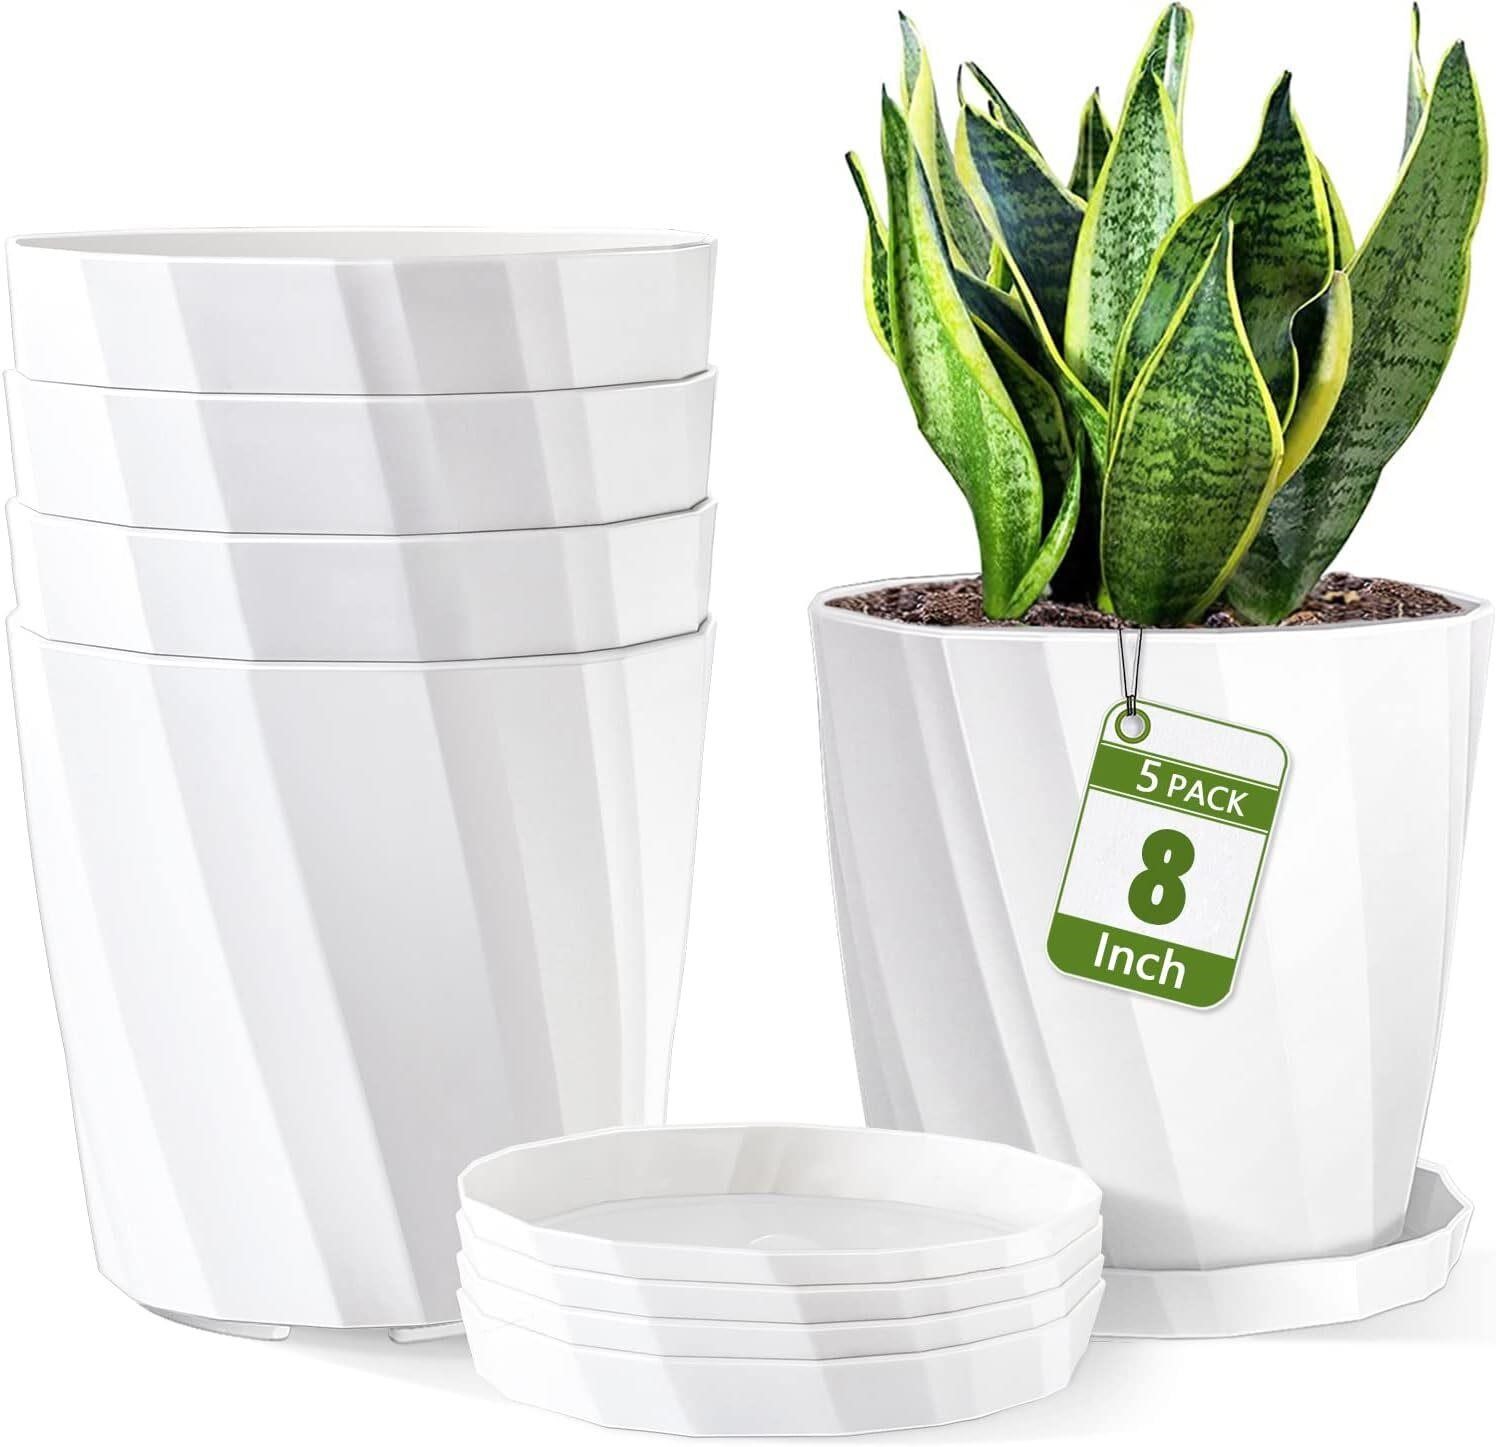 8 Inch Pots with Drainage - Set of 5